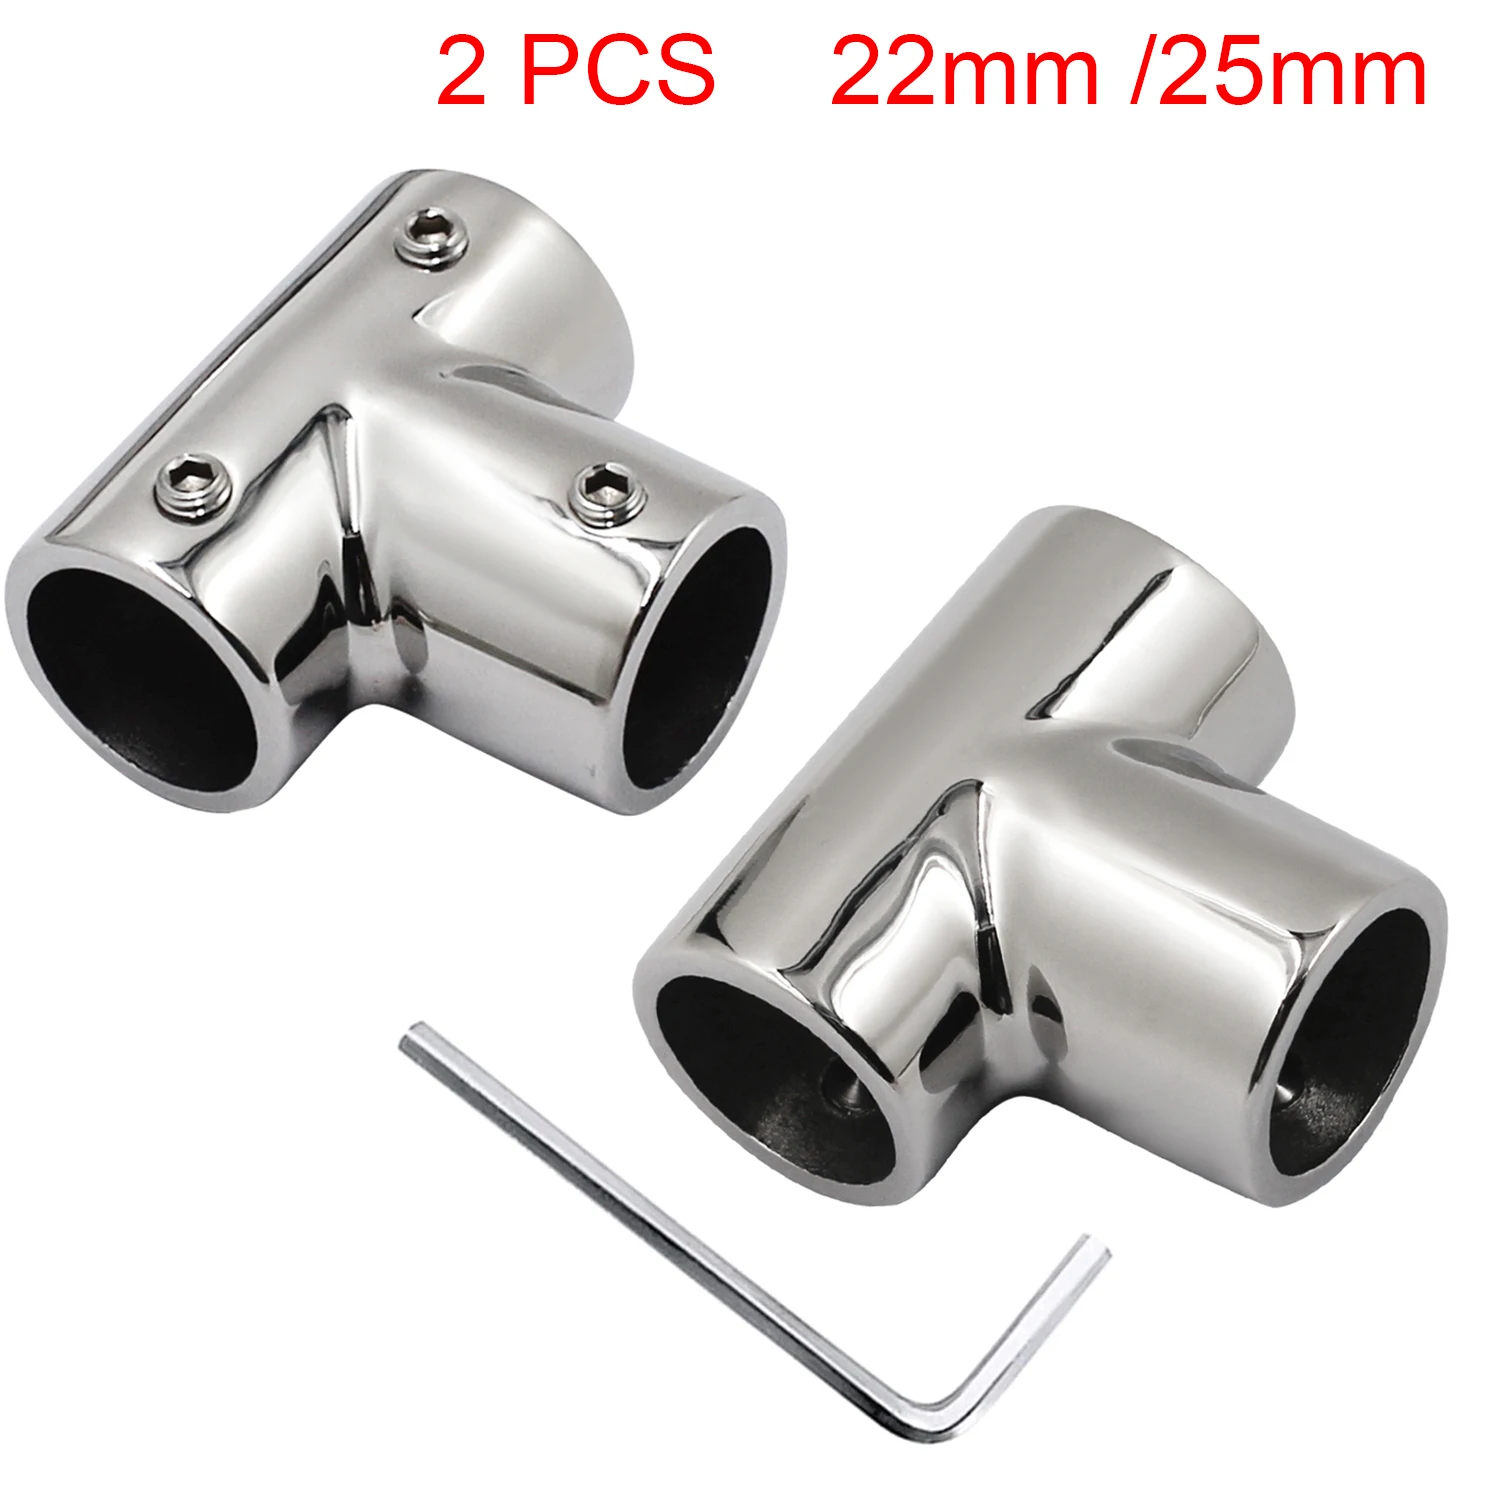 Enlarge 2 Pcs Stainless Steel 316 Marine Boat 3 Way Handrail Fitting 90° Deck Hand Rail Tee Joint Connector for 22mm/25mm Tube/Pipe